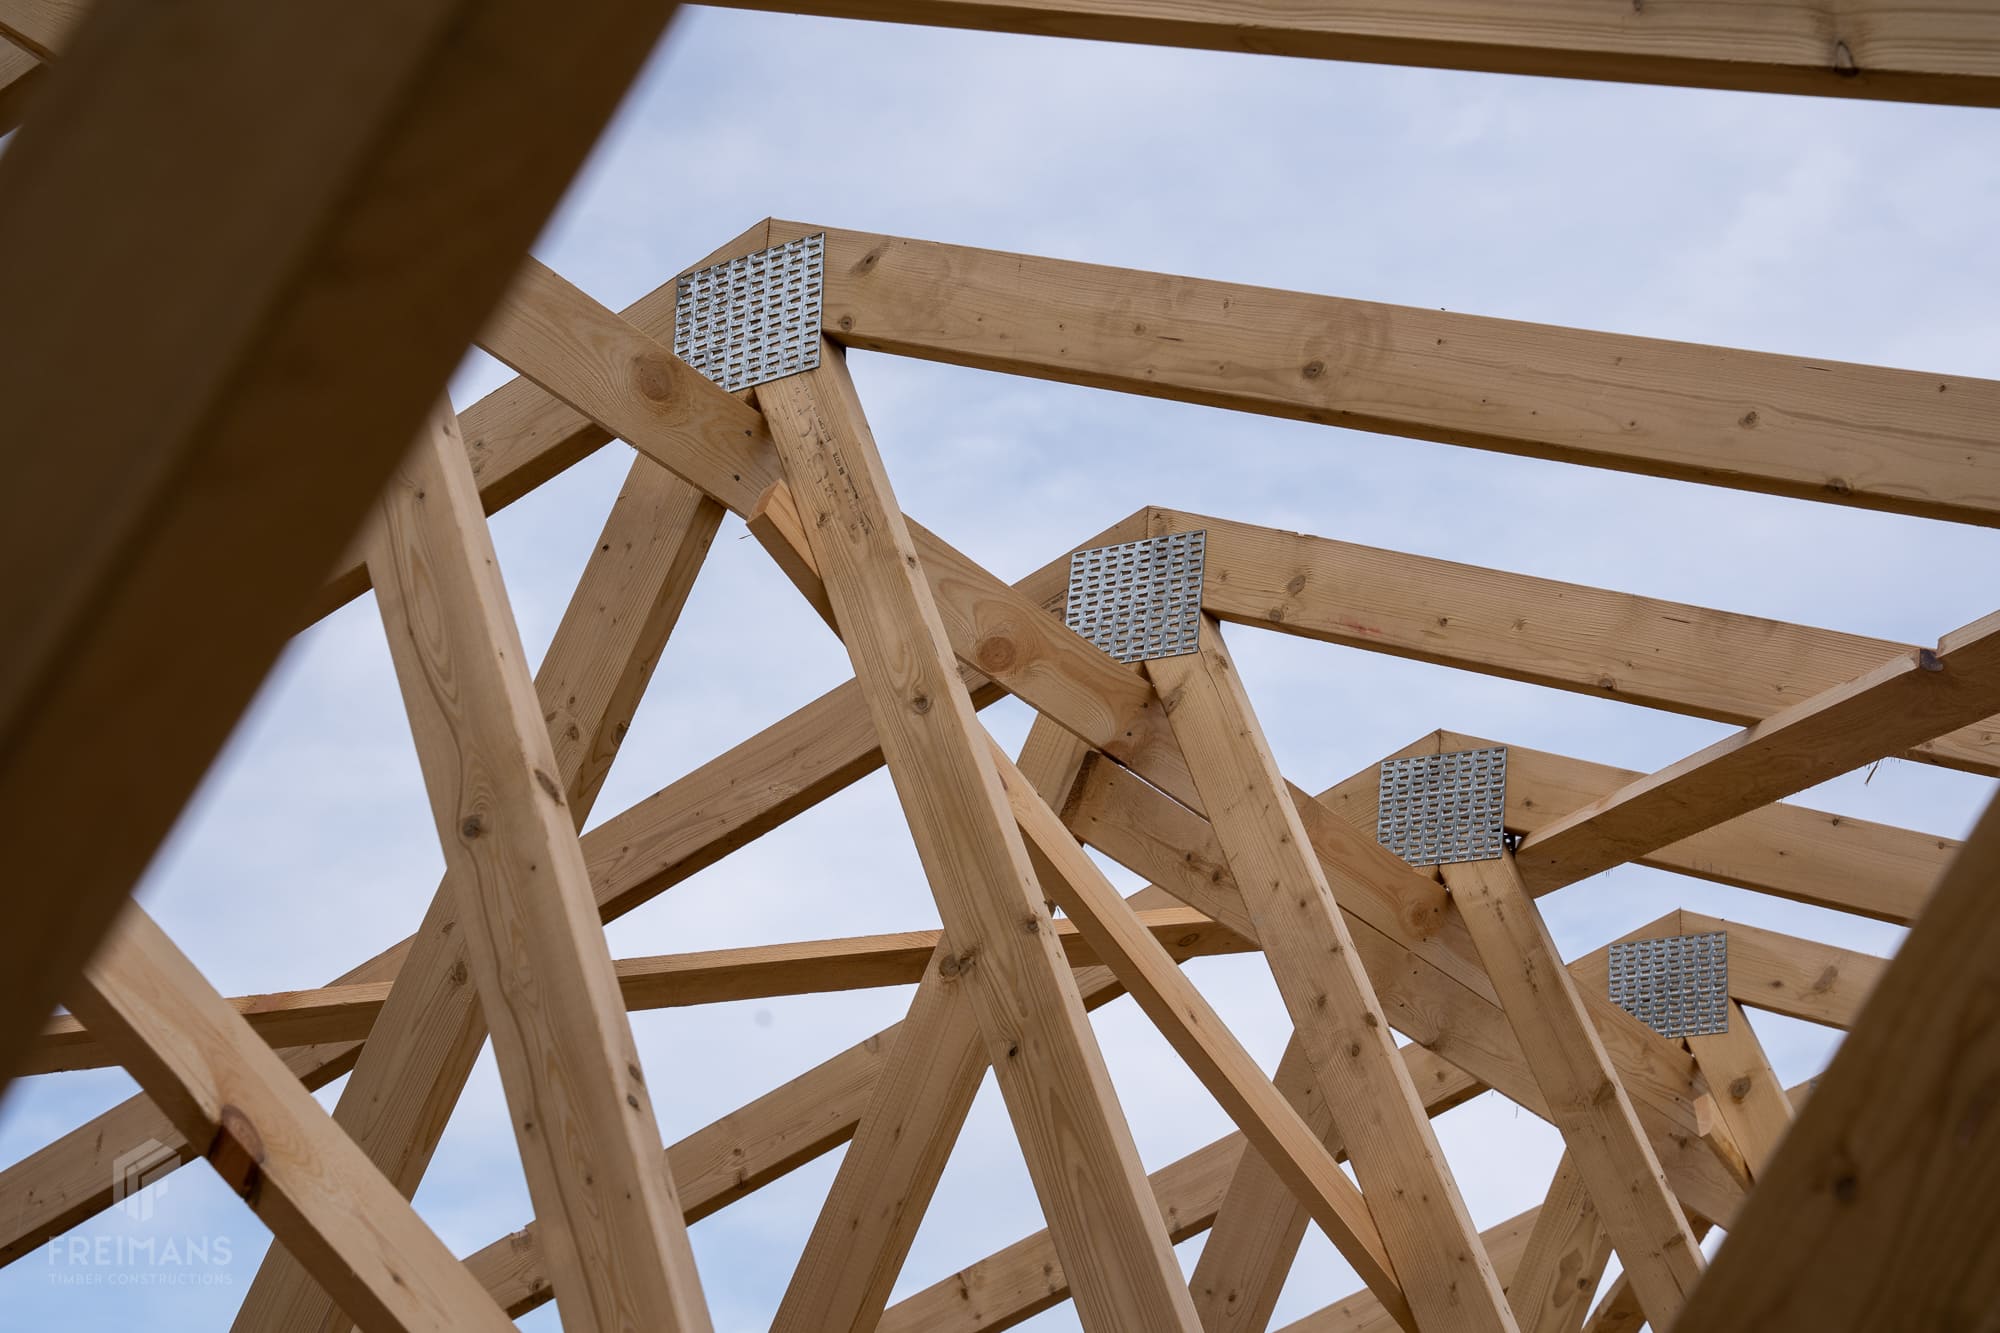 How does the timber price affect the cost of roof trusses?